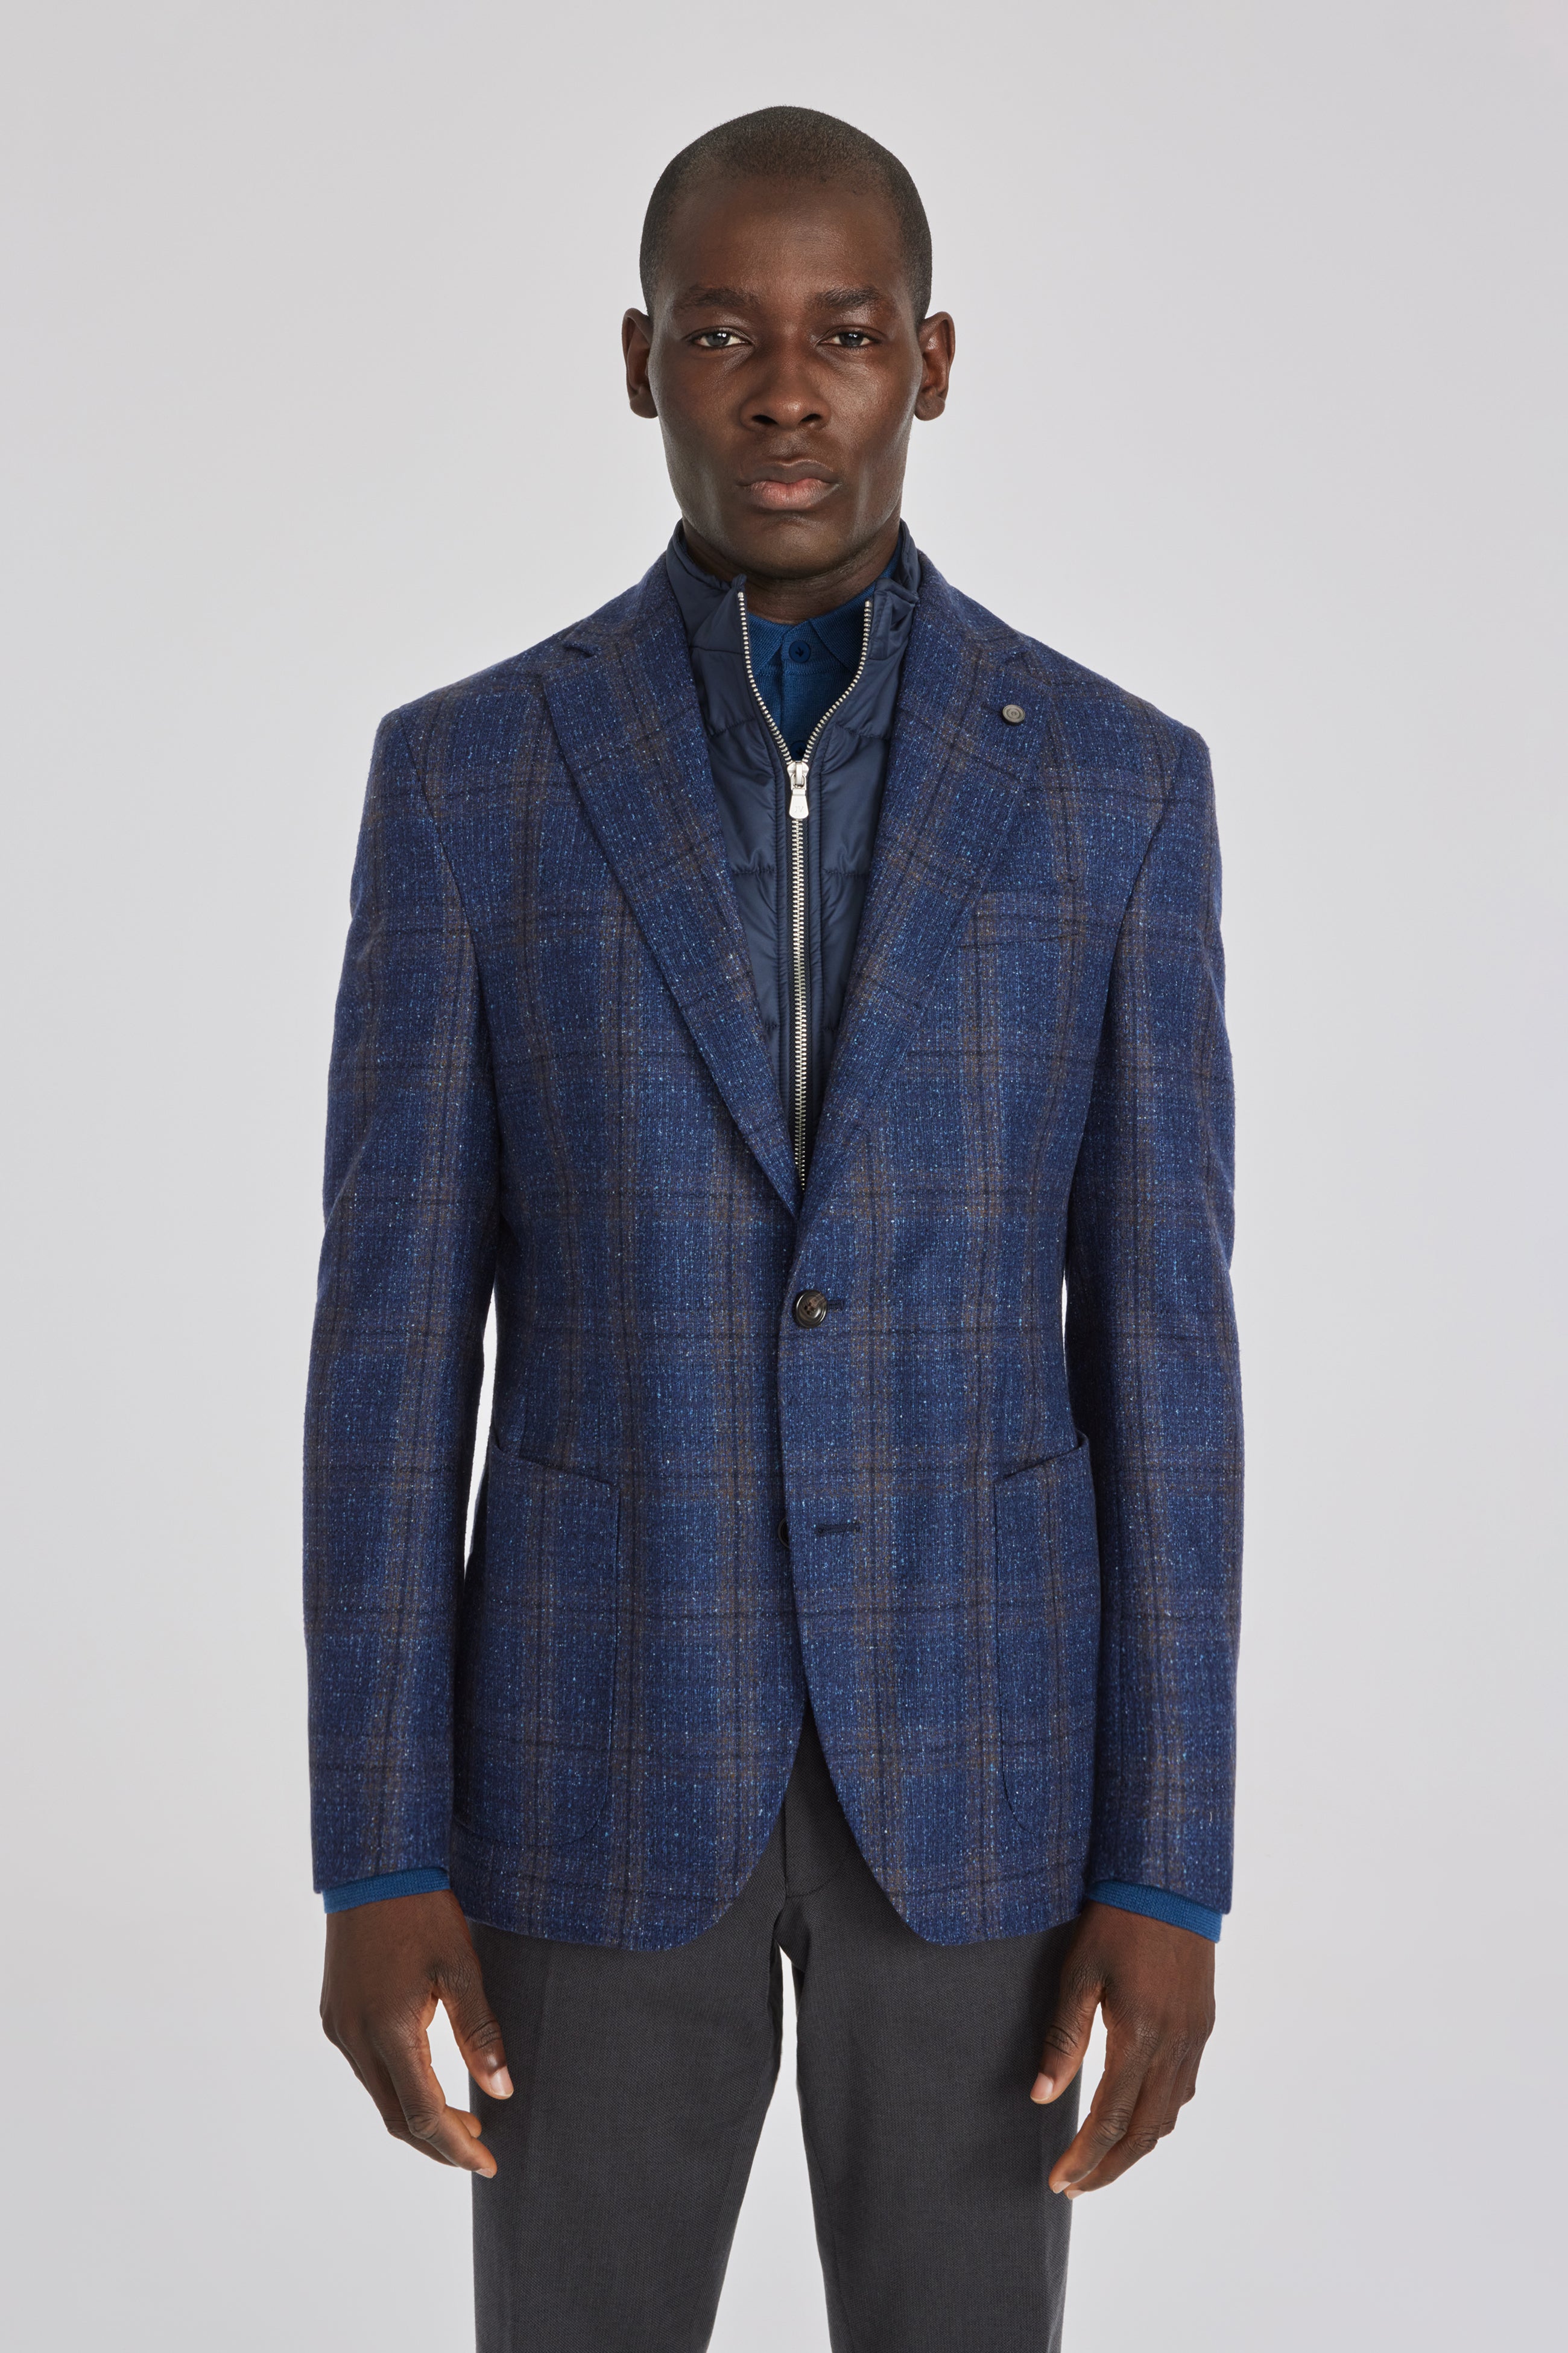 Sport Coat vs Blazer: What is the Difference Between These Types